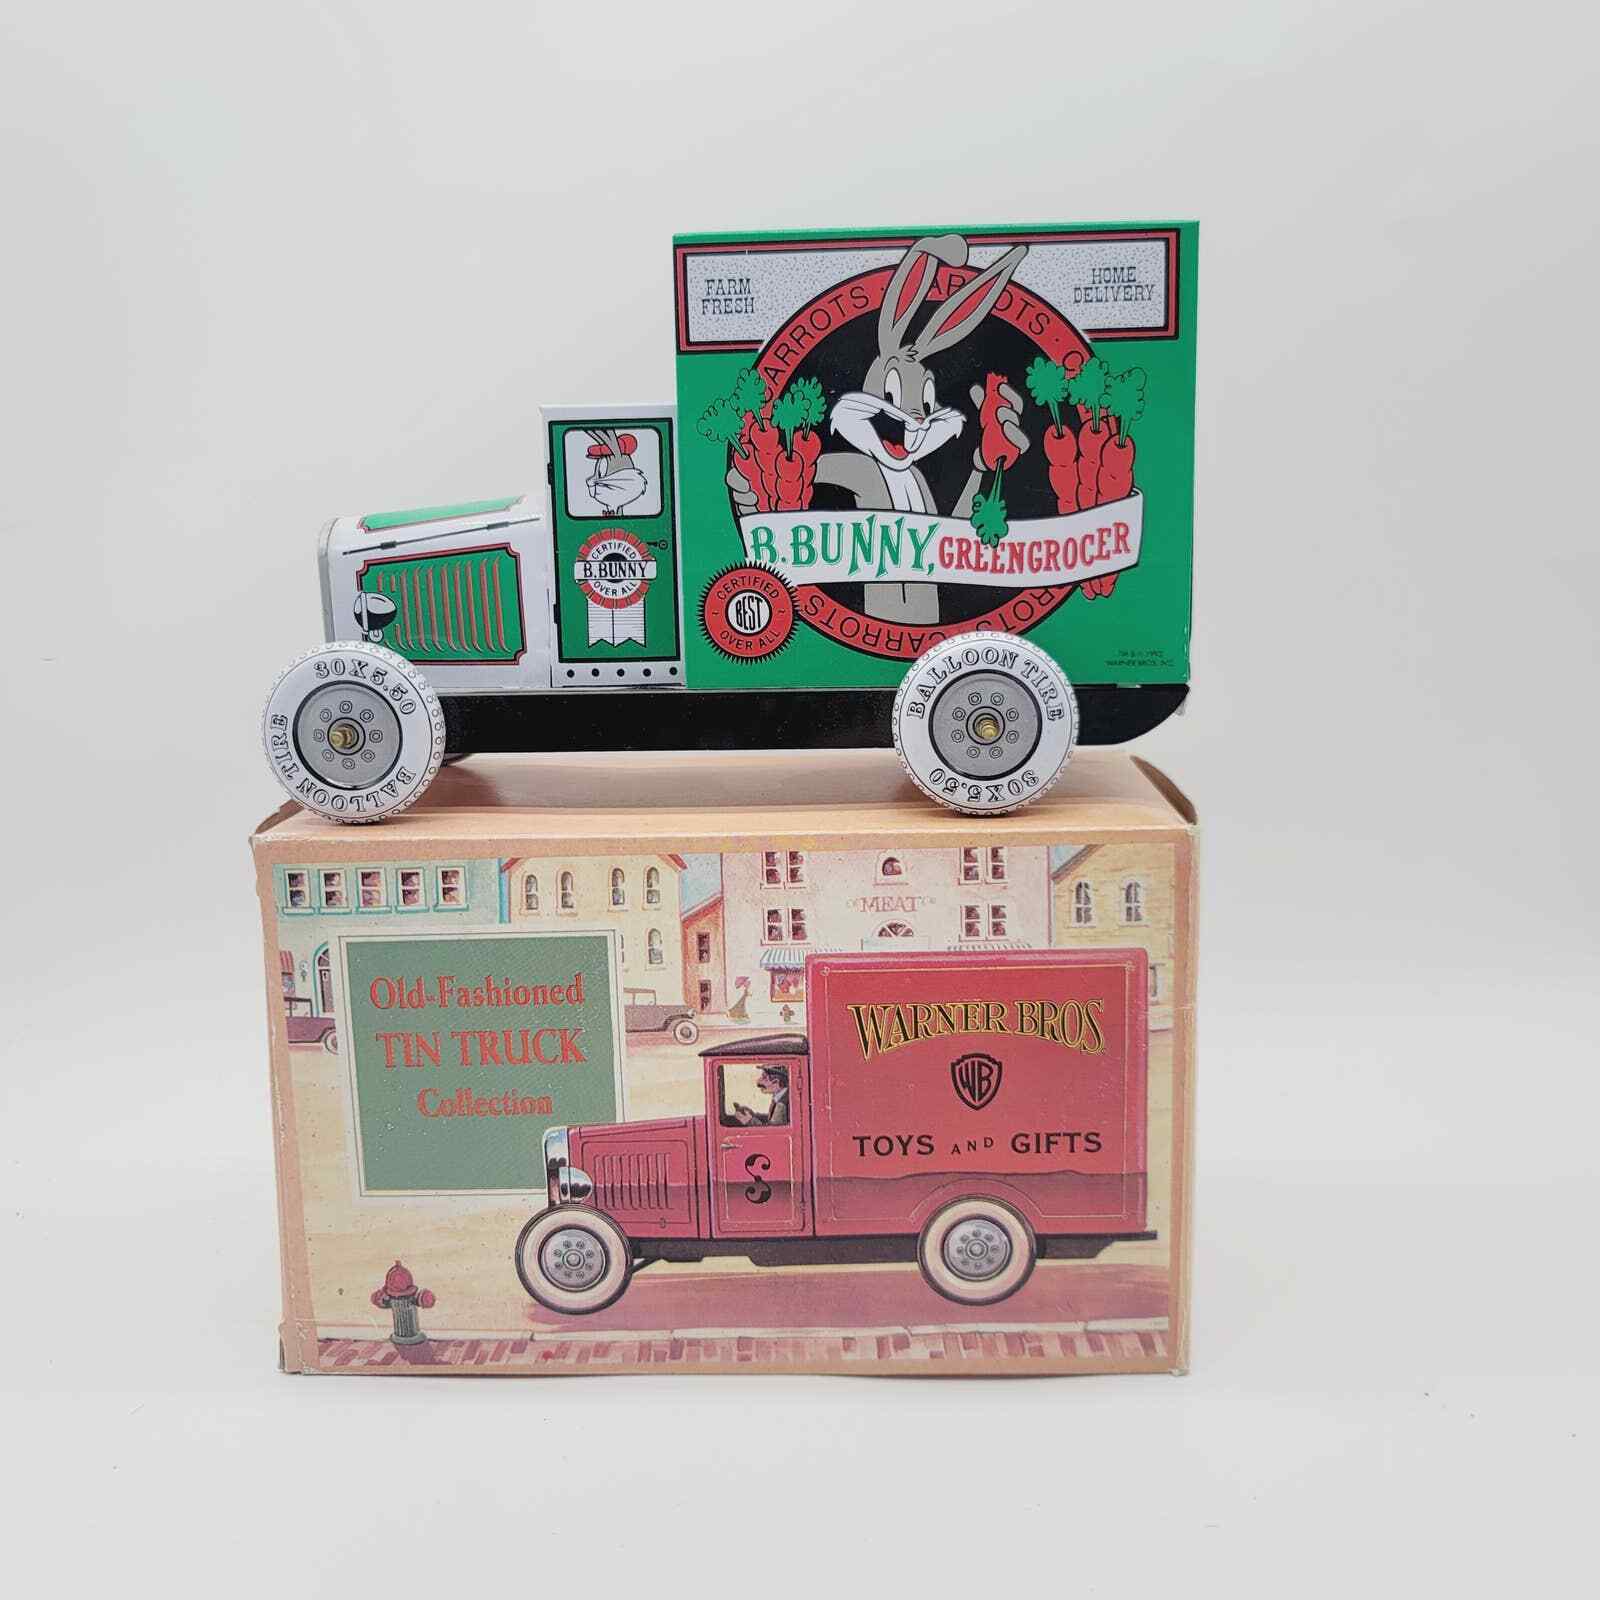 Warner Bros. Old fashioned tin truck  Bugs Bunny Green Grocers truck